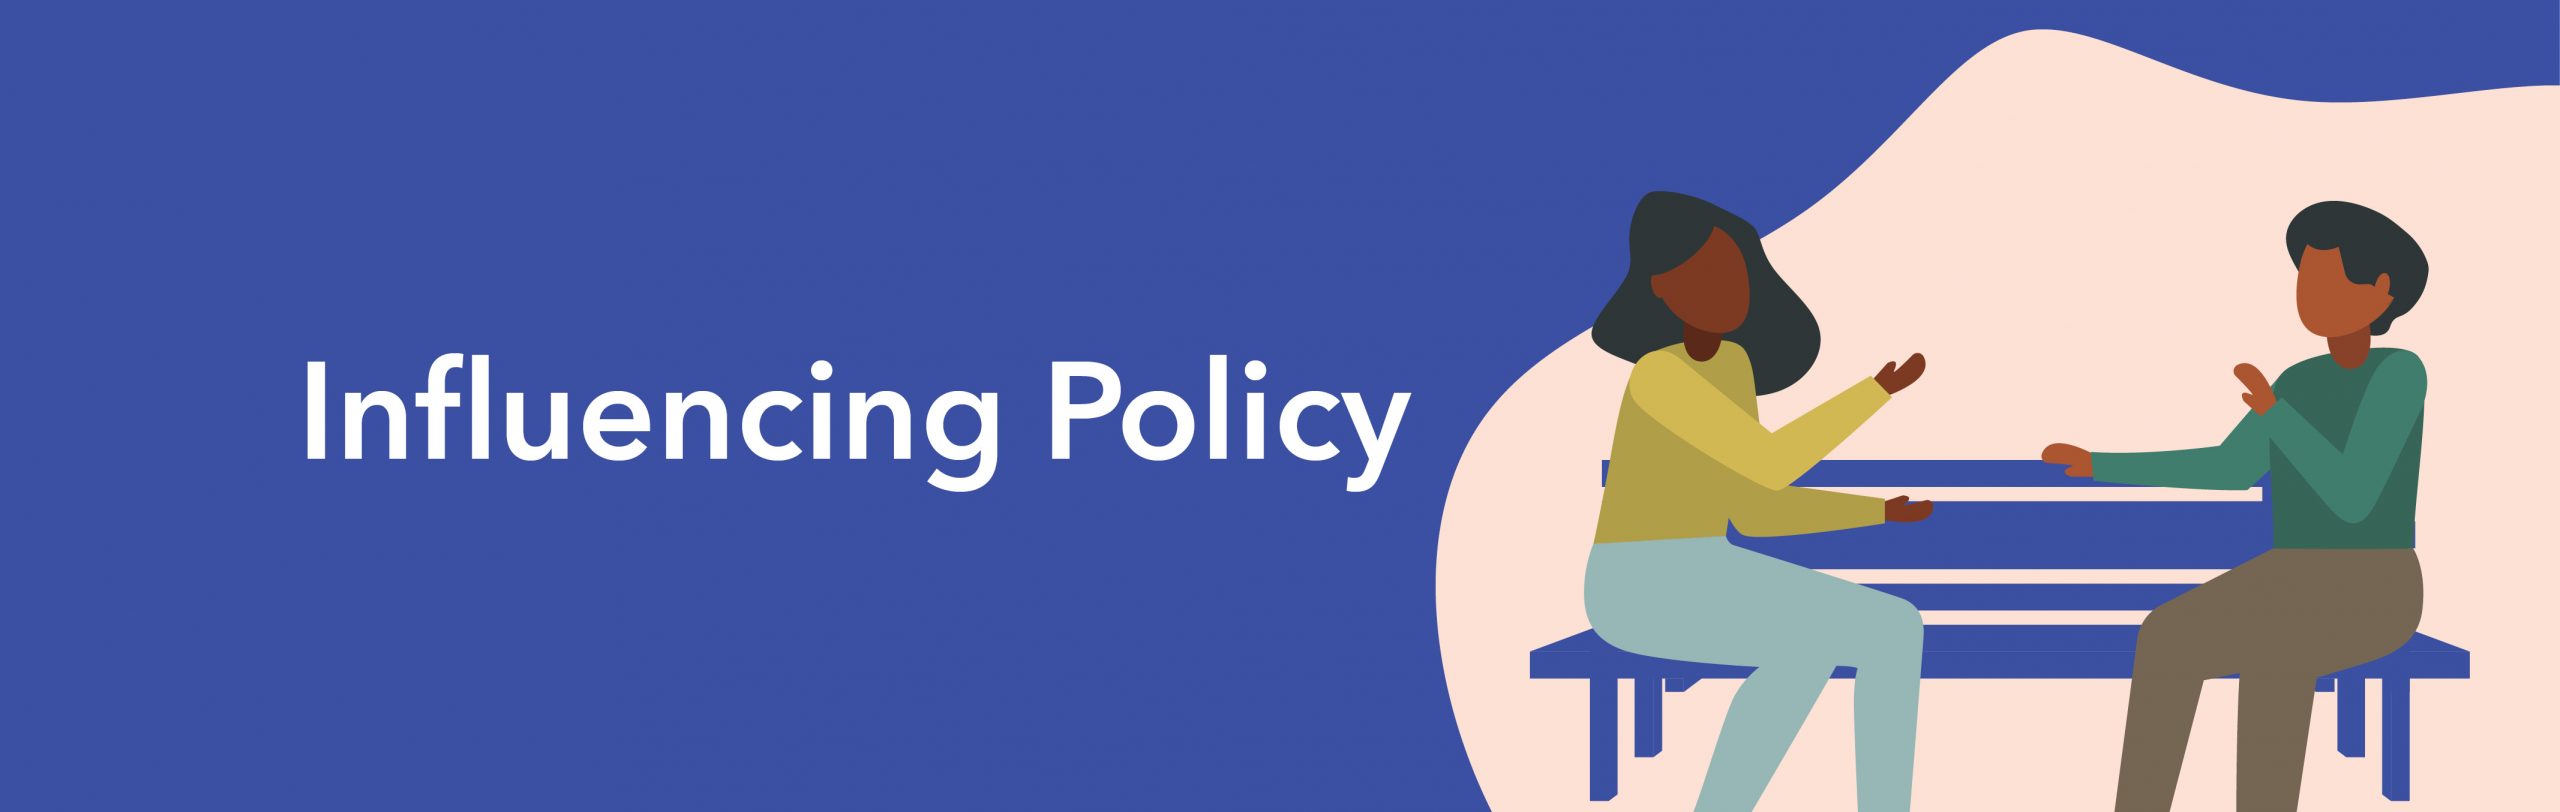 Influencing policy banner with two people talking on a bench